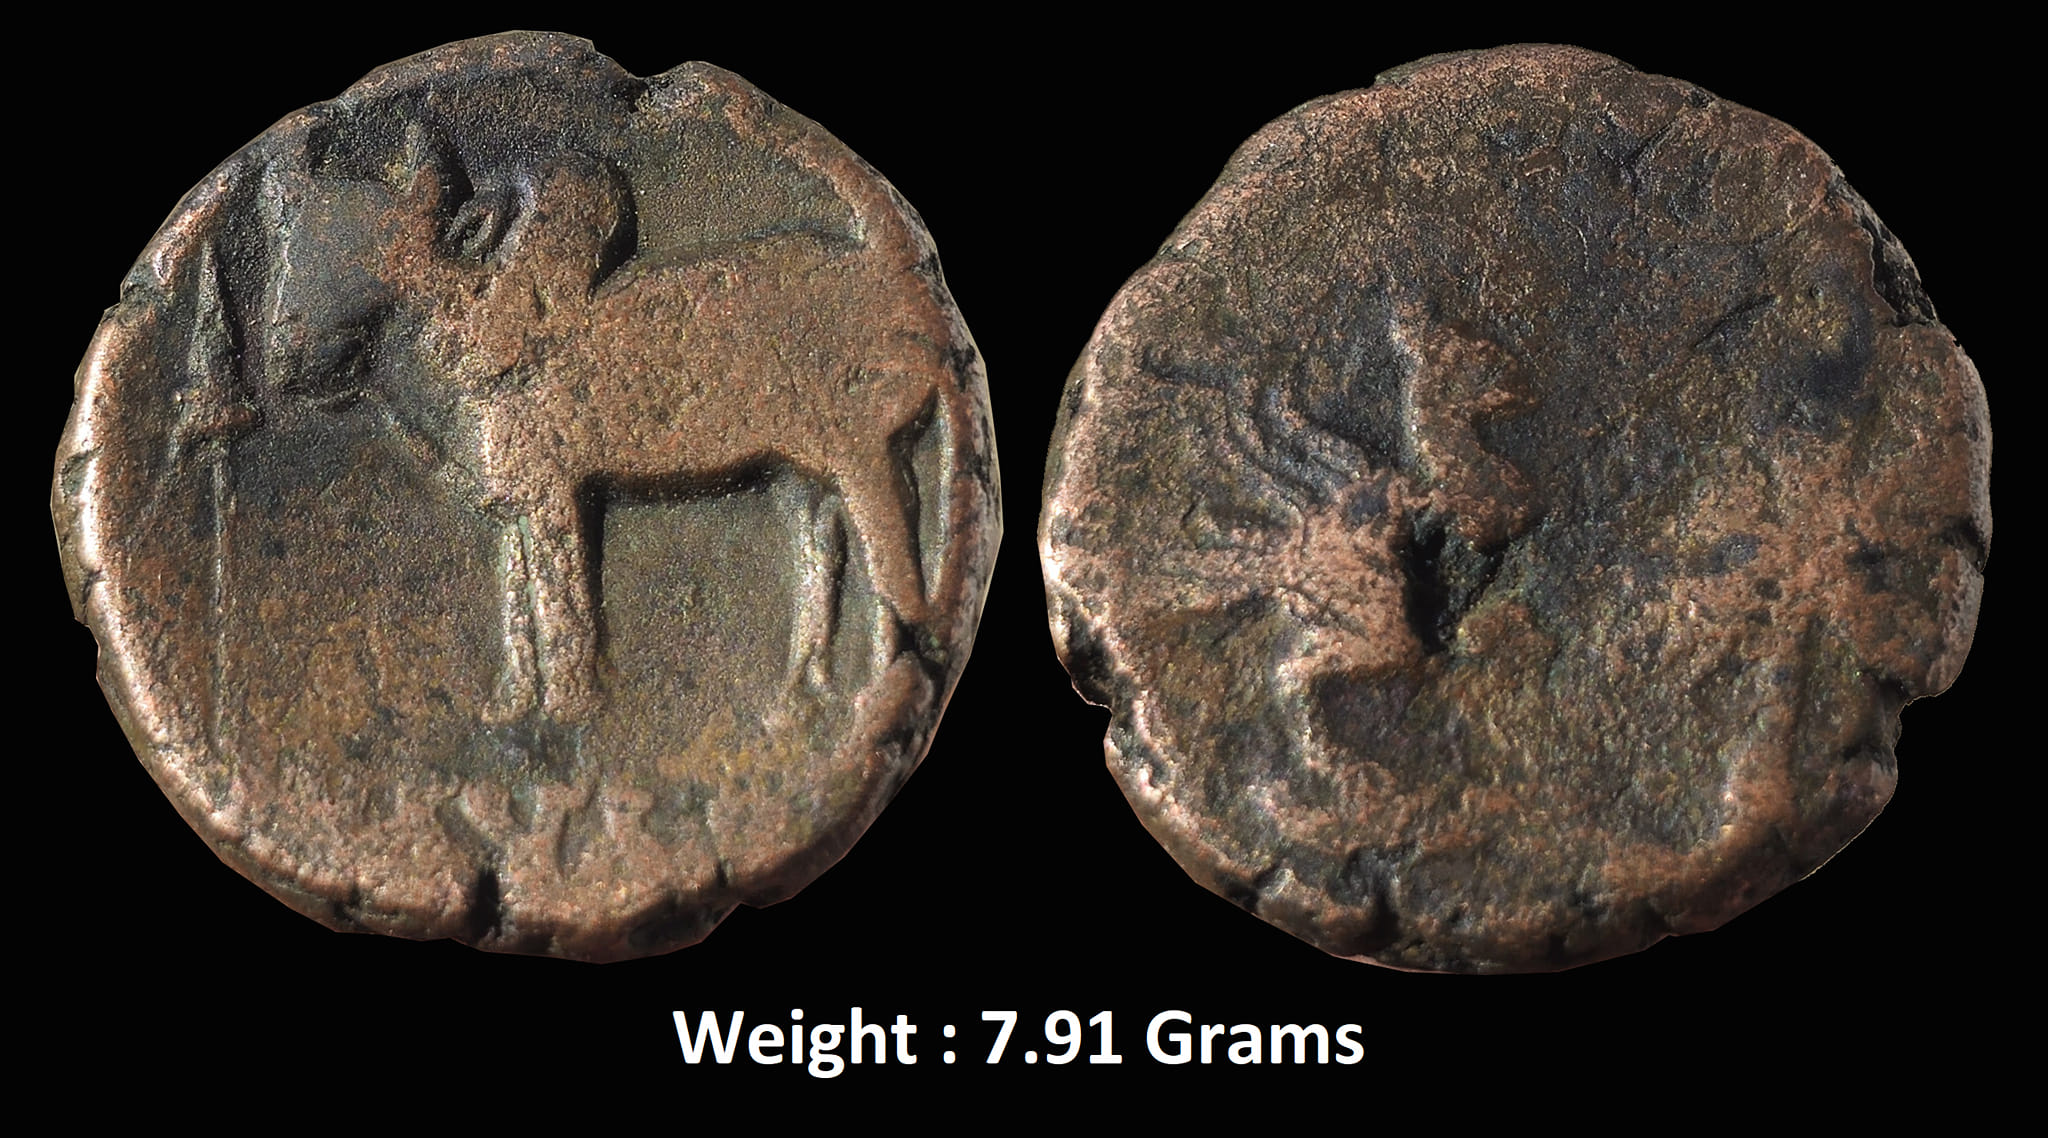 Ancient ; Kings of Ayodhya ; Satyamitra,
3rd century AD ; Rare
Weight : 7.91 Grams
Obverse: Bull standing left, with sacrificial spear to left and brahmi legend below.
Reverse: Peacock with Palm tree to right
Ref: MACW 4761; Pieper 1012